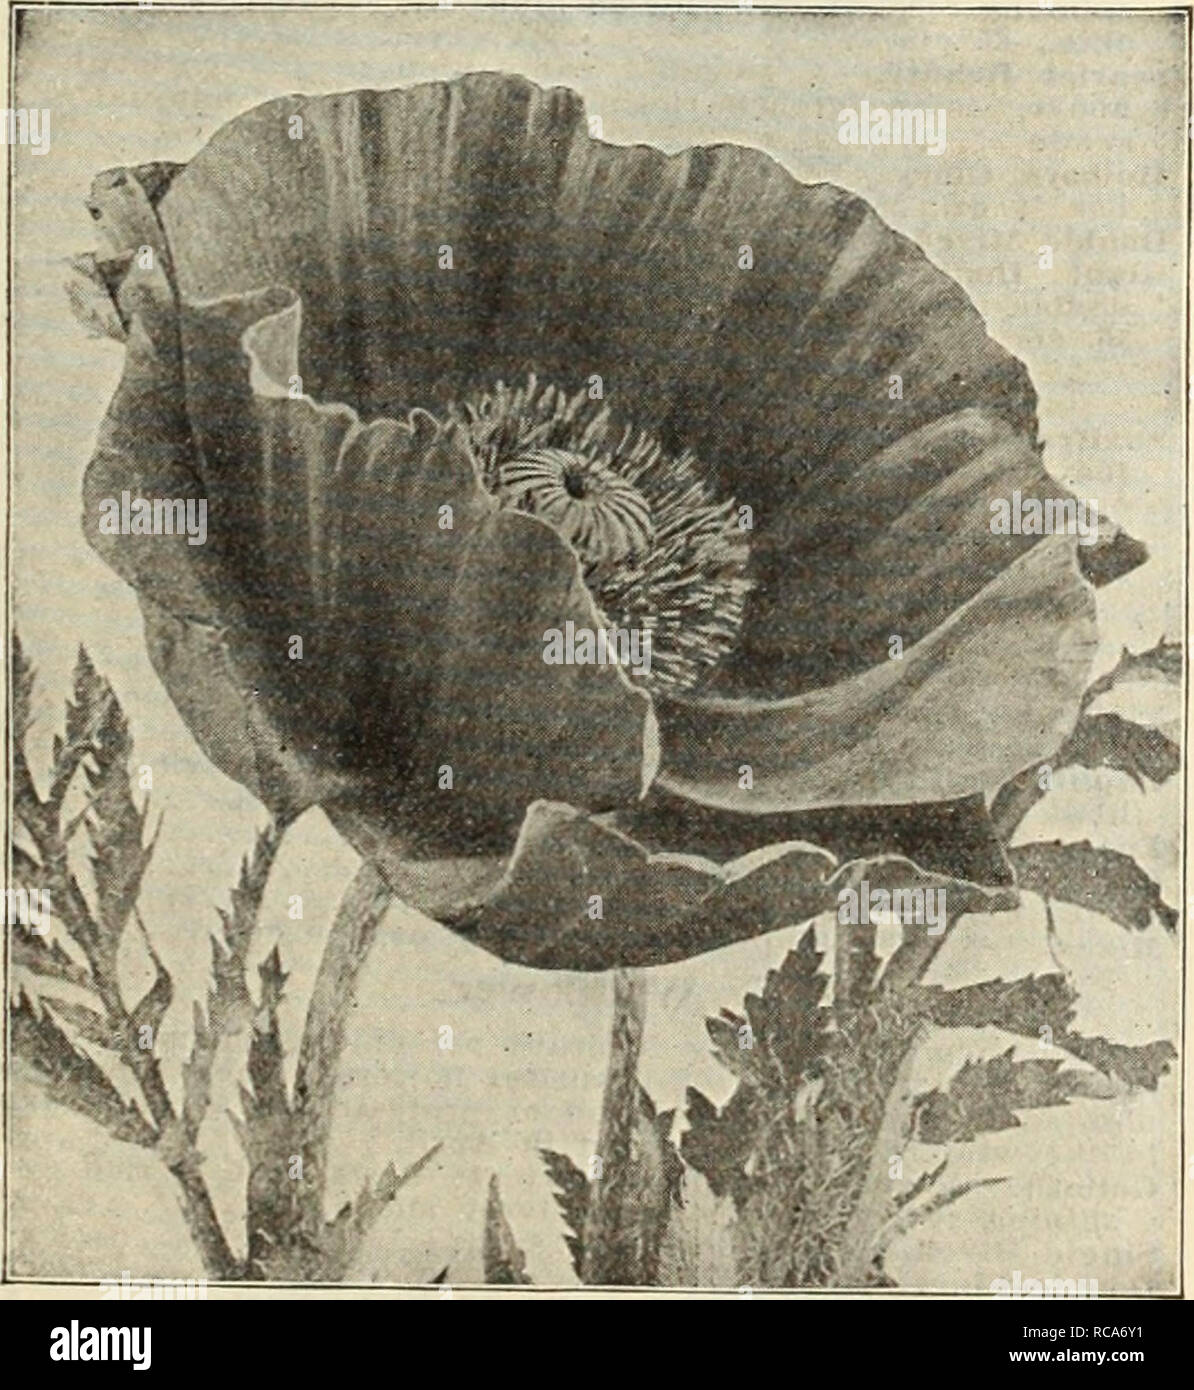 . Dreer's autumn catalogue 1914. Bulbs (Plants) Catalogs; Flowers Seeds Catalogs; Gardening Equipment and supplies Catalogs; Nurseries (Horticulture) Catalogs; Fruit Seeds Catalogs; Vegetables Seeds Catalogs. IMHWADRKR -PmiAKLPHIAMÂ® gtllABLE FLOWERSEEDS M ^^ Pentstemon {Beard 2'ongue). Highly useful and attractive hardy perennials, and much â used in the hardy border. Per Pkt. Barbatu8 Torreyi. Brilliant coral-red 10 Miied. A great variety of kinds and colors 5 Phlox. Hardy Perennial. Our collection of these is the most extensive in the world. Seed should be sown as soon as ripe. Order now a Stock Photo